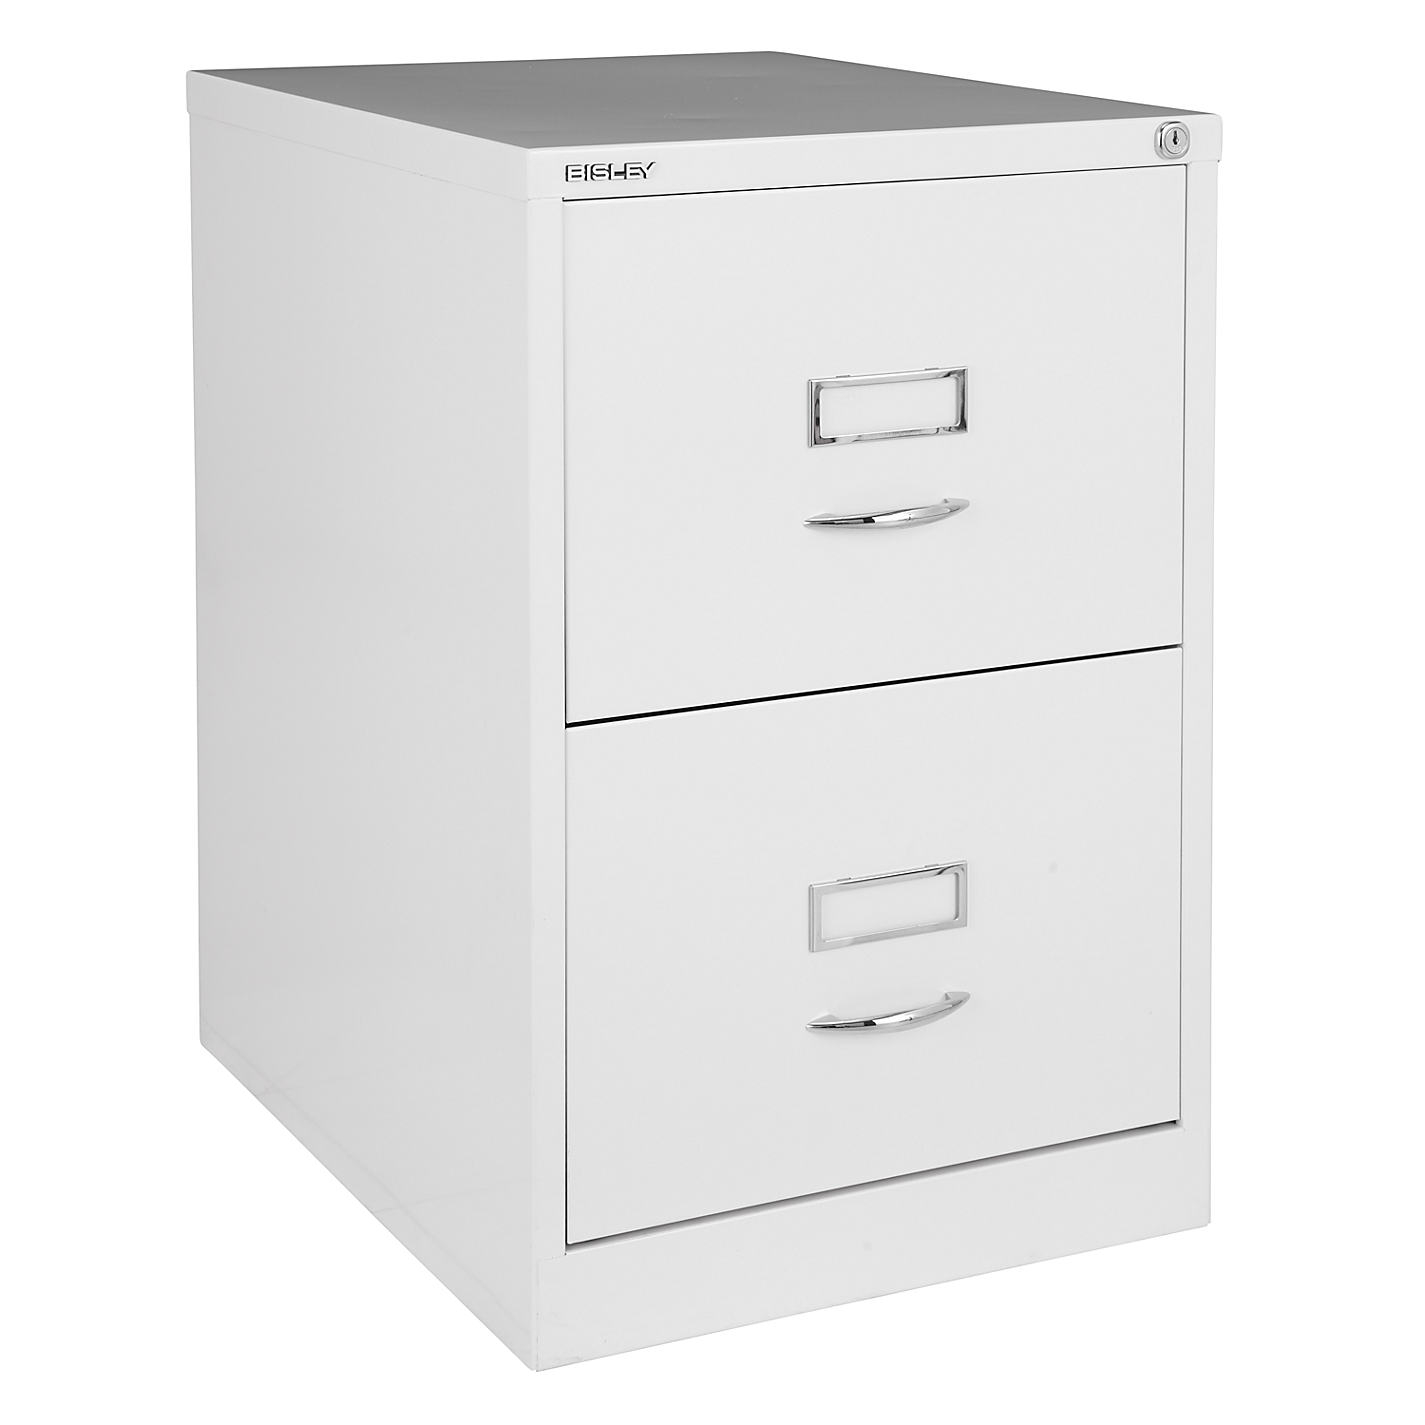 Incredible Small Metal Filing Cabinet Hon Filing Cabinets Old Filing with size 1425 X 1425